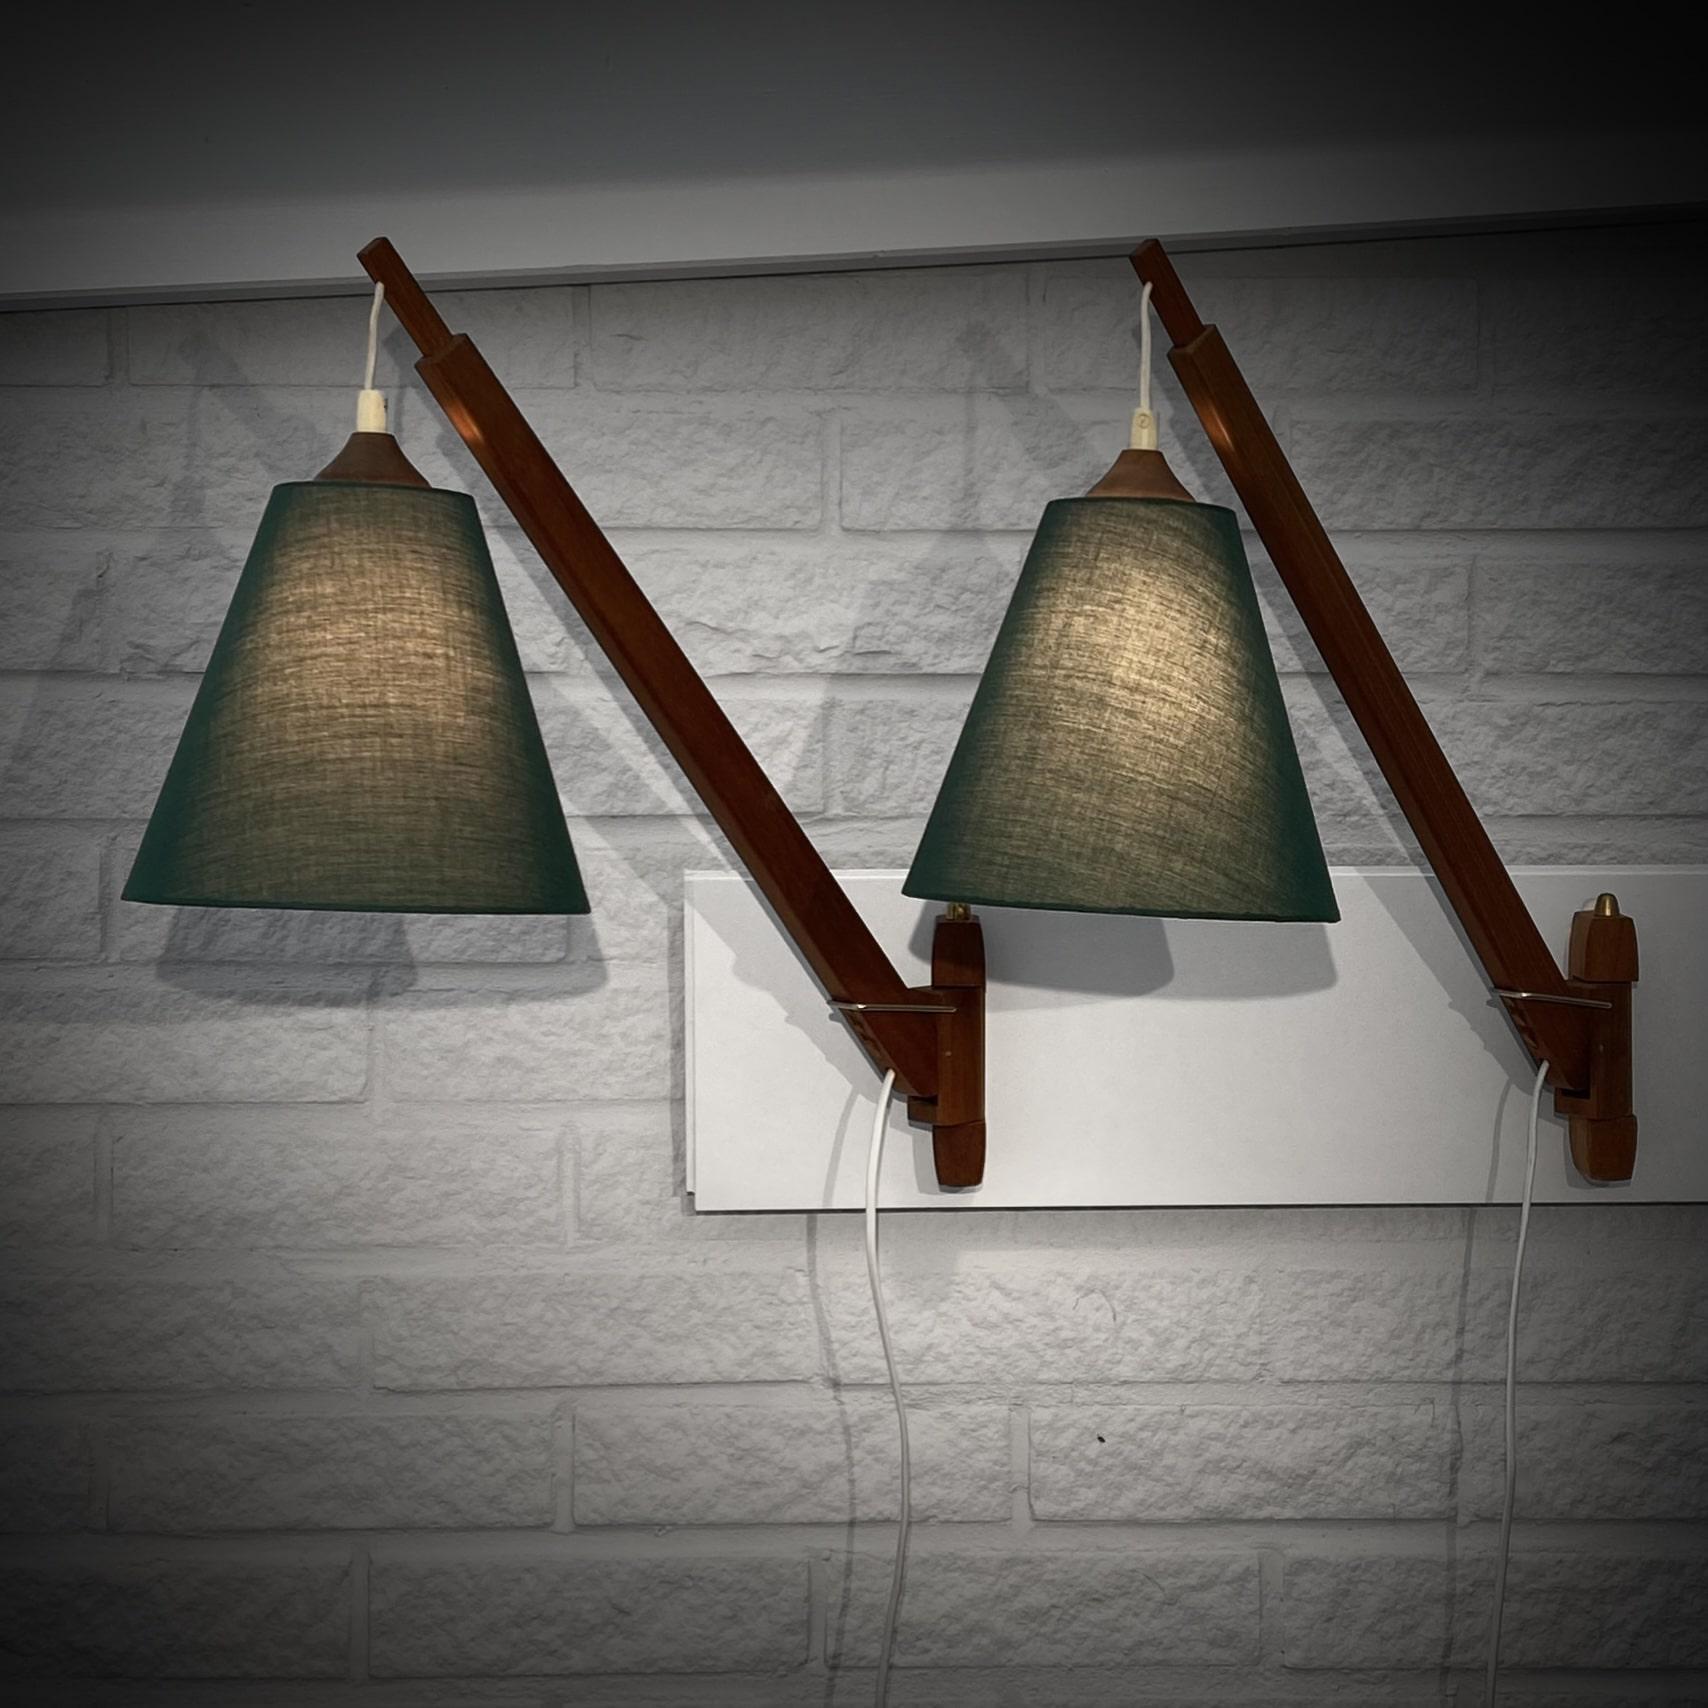 A pair of Swedish modernist wall lamps made from solid teak with pivotal telescope arm adjustable in height. A model known as fishing rod lamps. Brass details and cone shaped shades upholstered in green textile. Produced by an unidentified Swedish